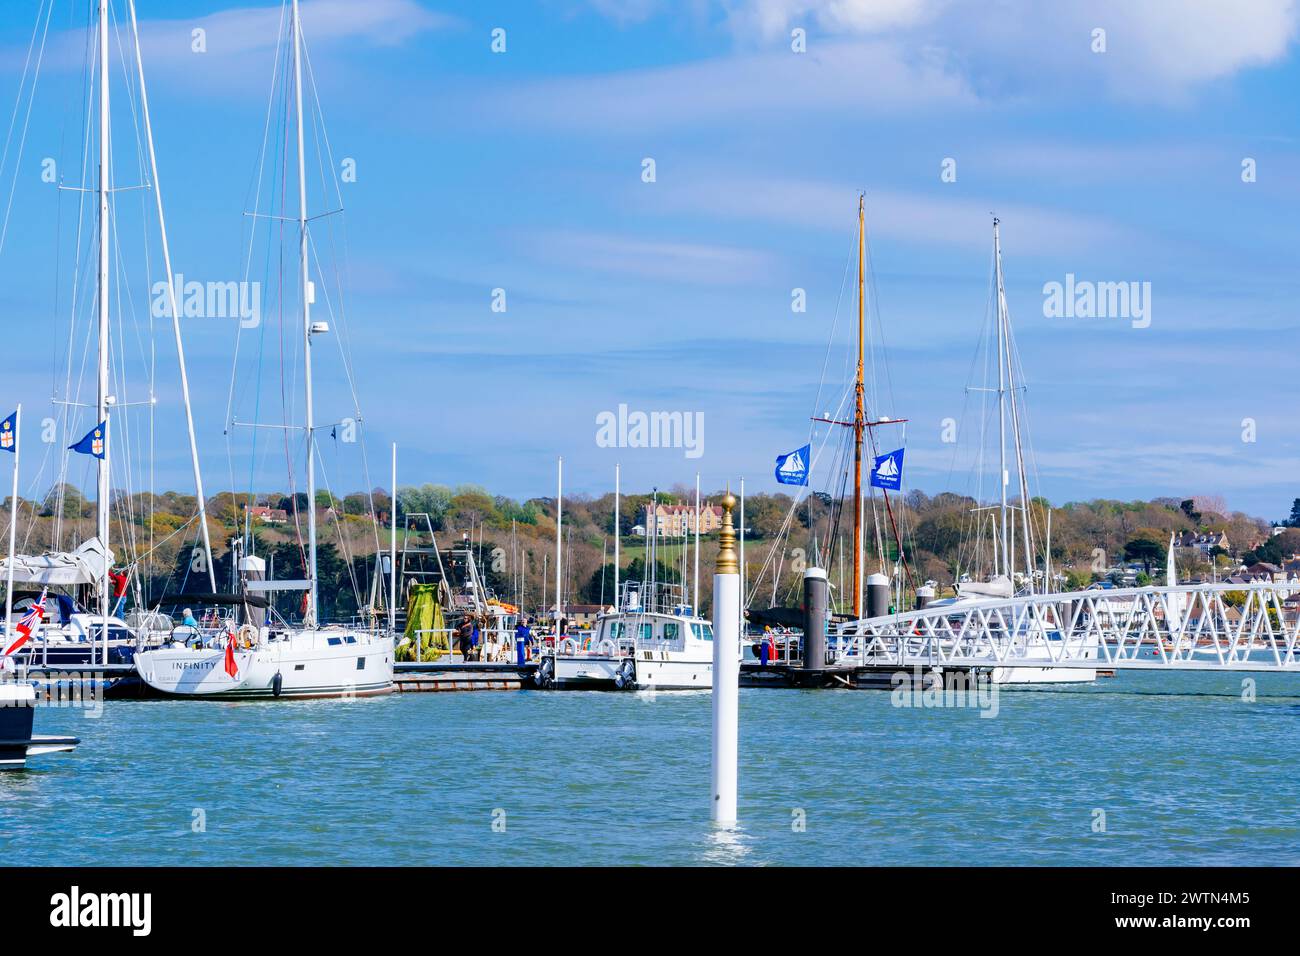 Yachts moored at Cowes Marina. Cowes, Isle of Wight, England, United Kingdom, Europe Stock Photo